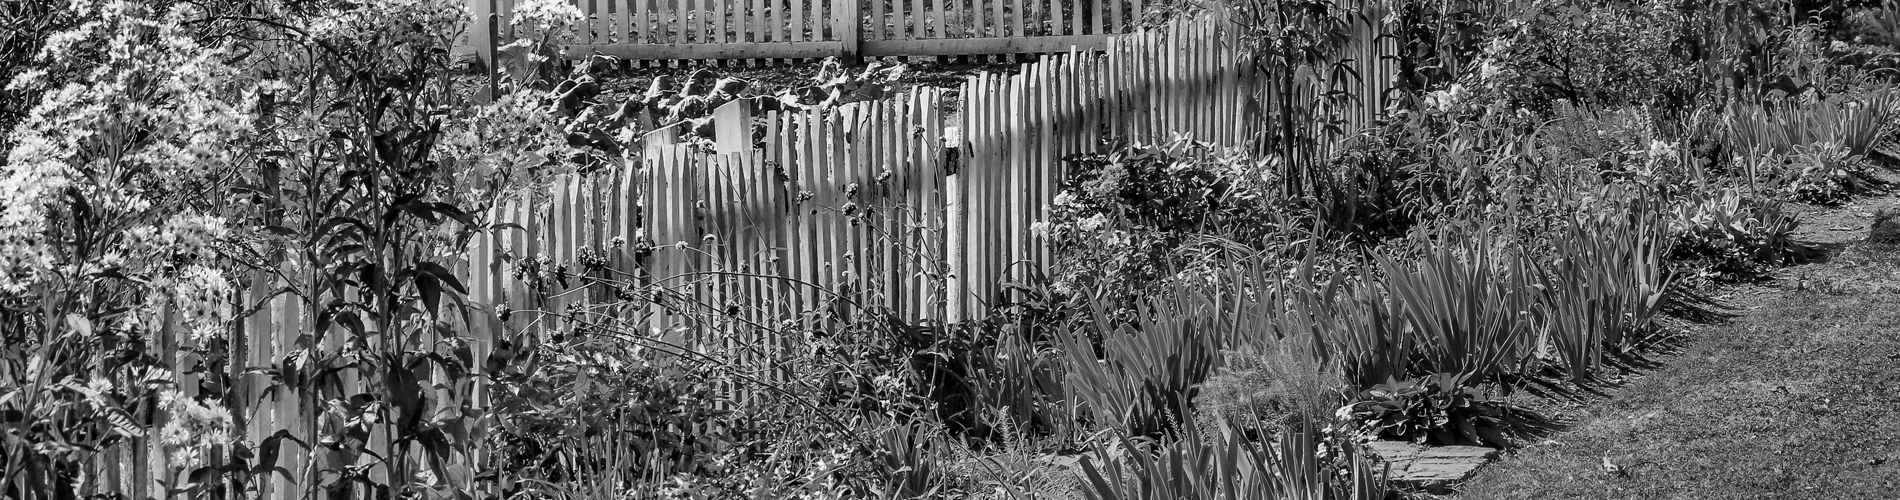 An image of a completed garden, with a selection of carefully chosen plants and a quaint styled picket fence.